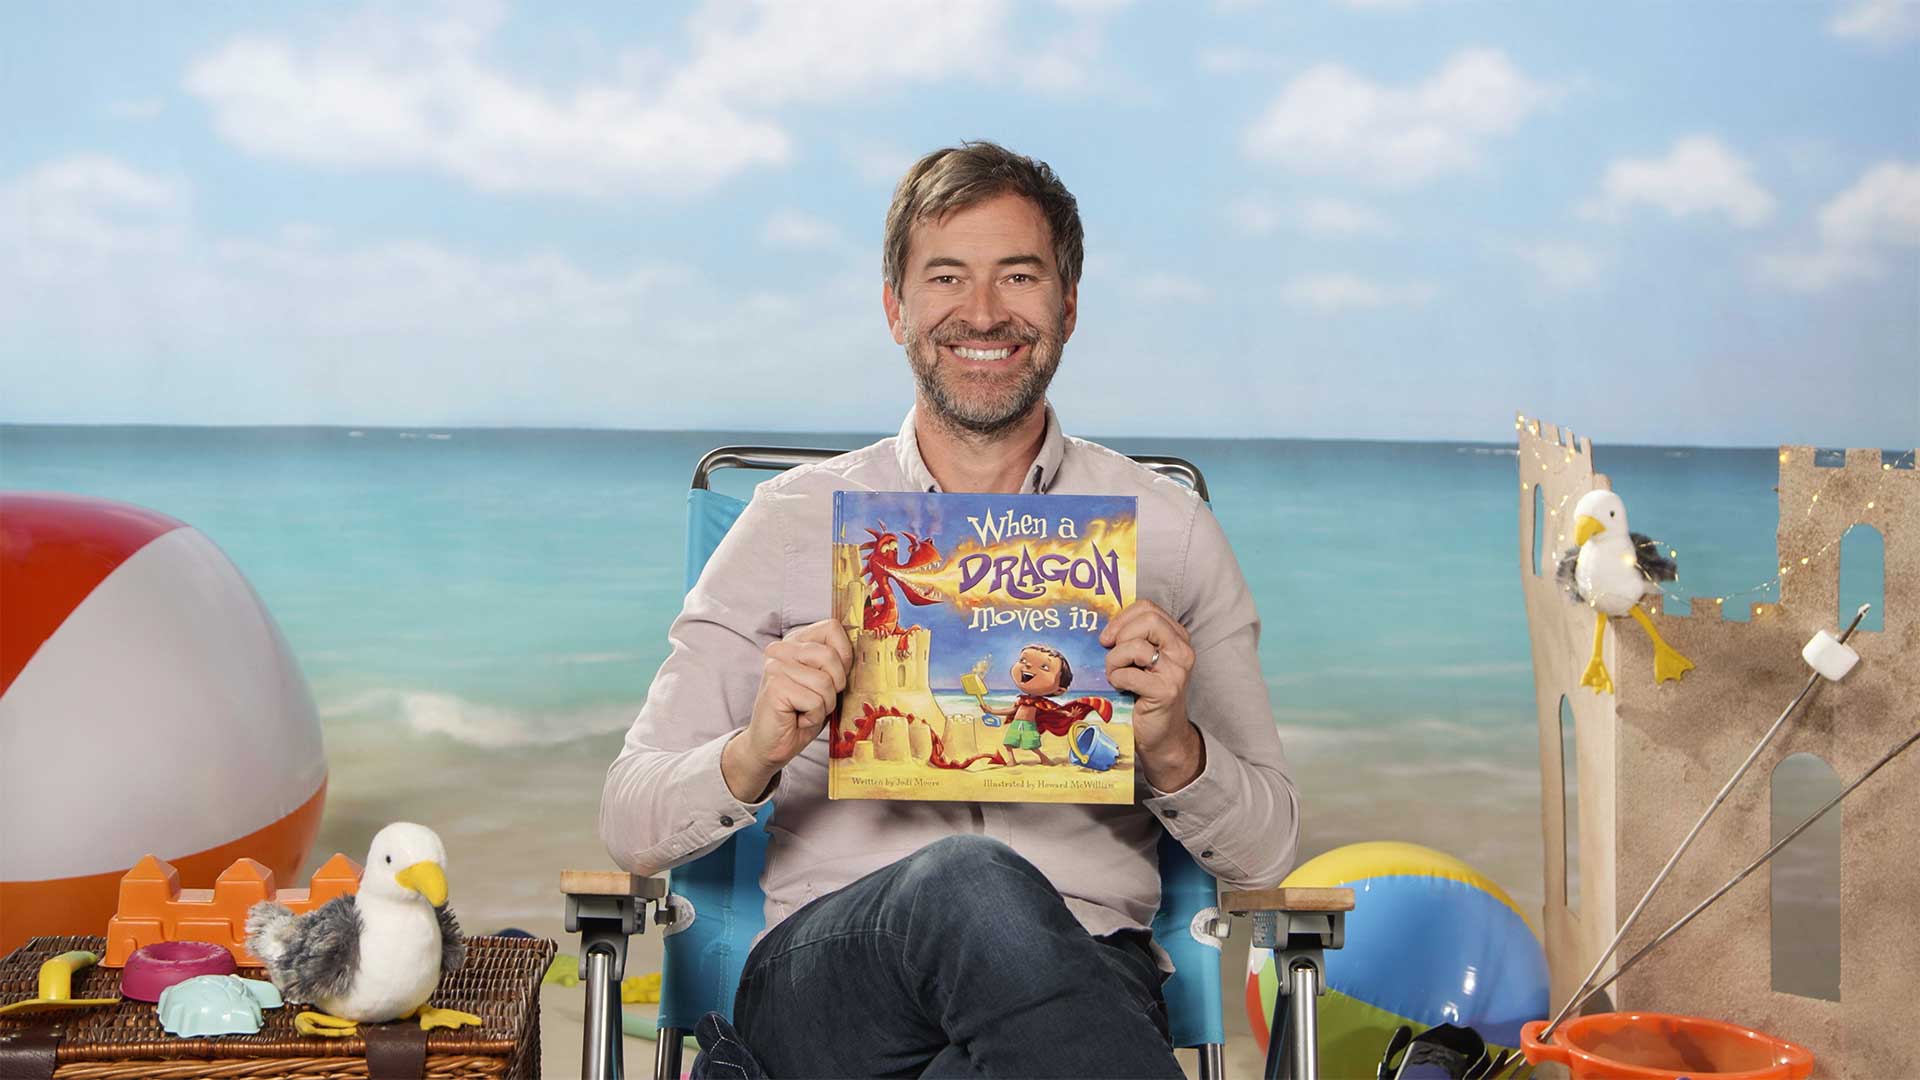 When A Dragon Moves In read by Mark Duplass